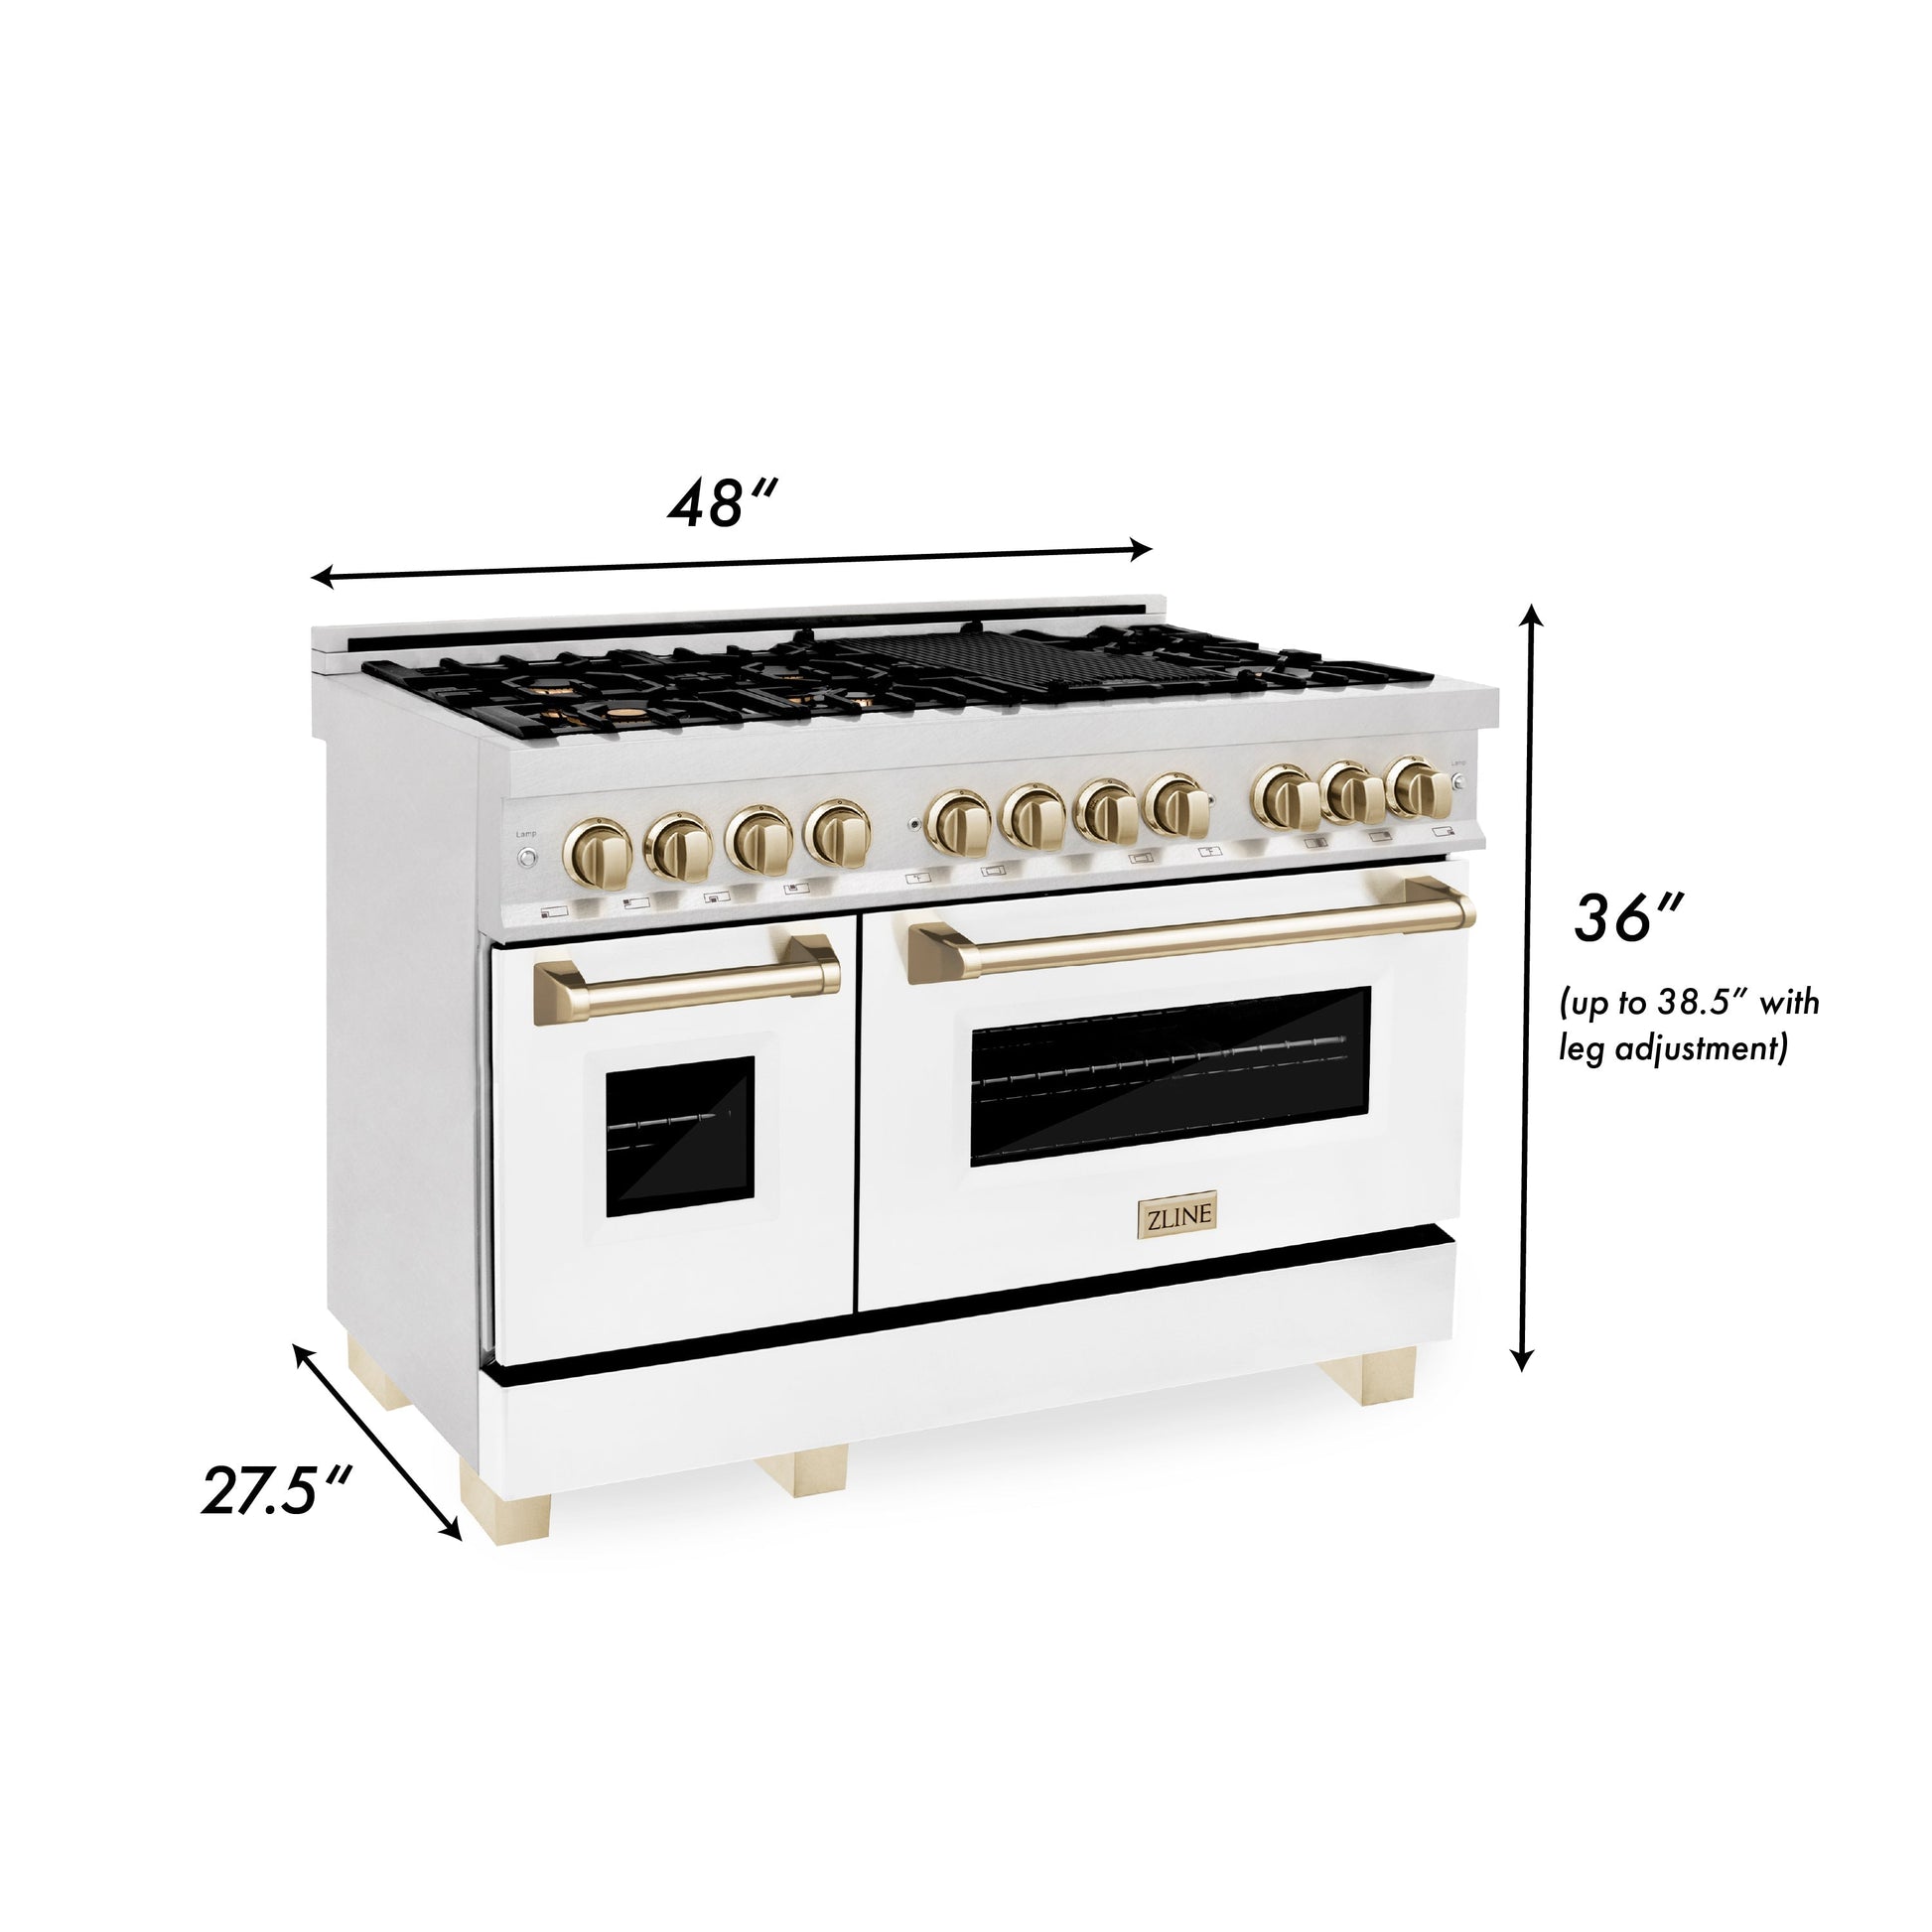 ZLINE Autograph Edition 48" Dual Fuel Range with Gas Stove and Electric Oven - DuraSnow Stainless Steel with Matte White Door and Accents